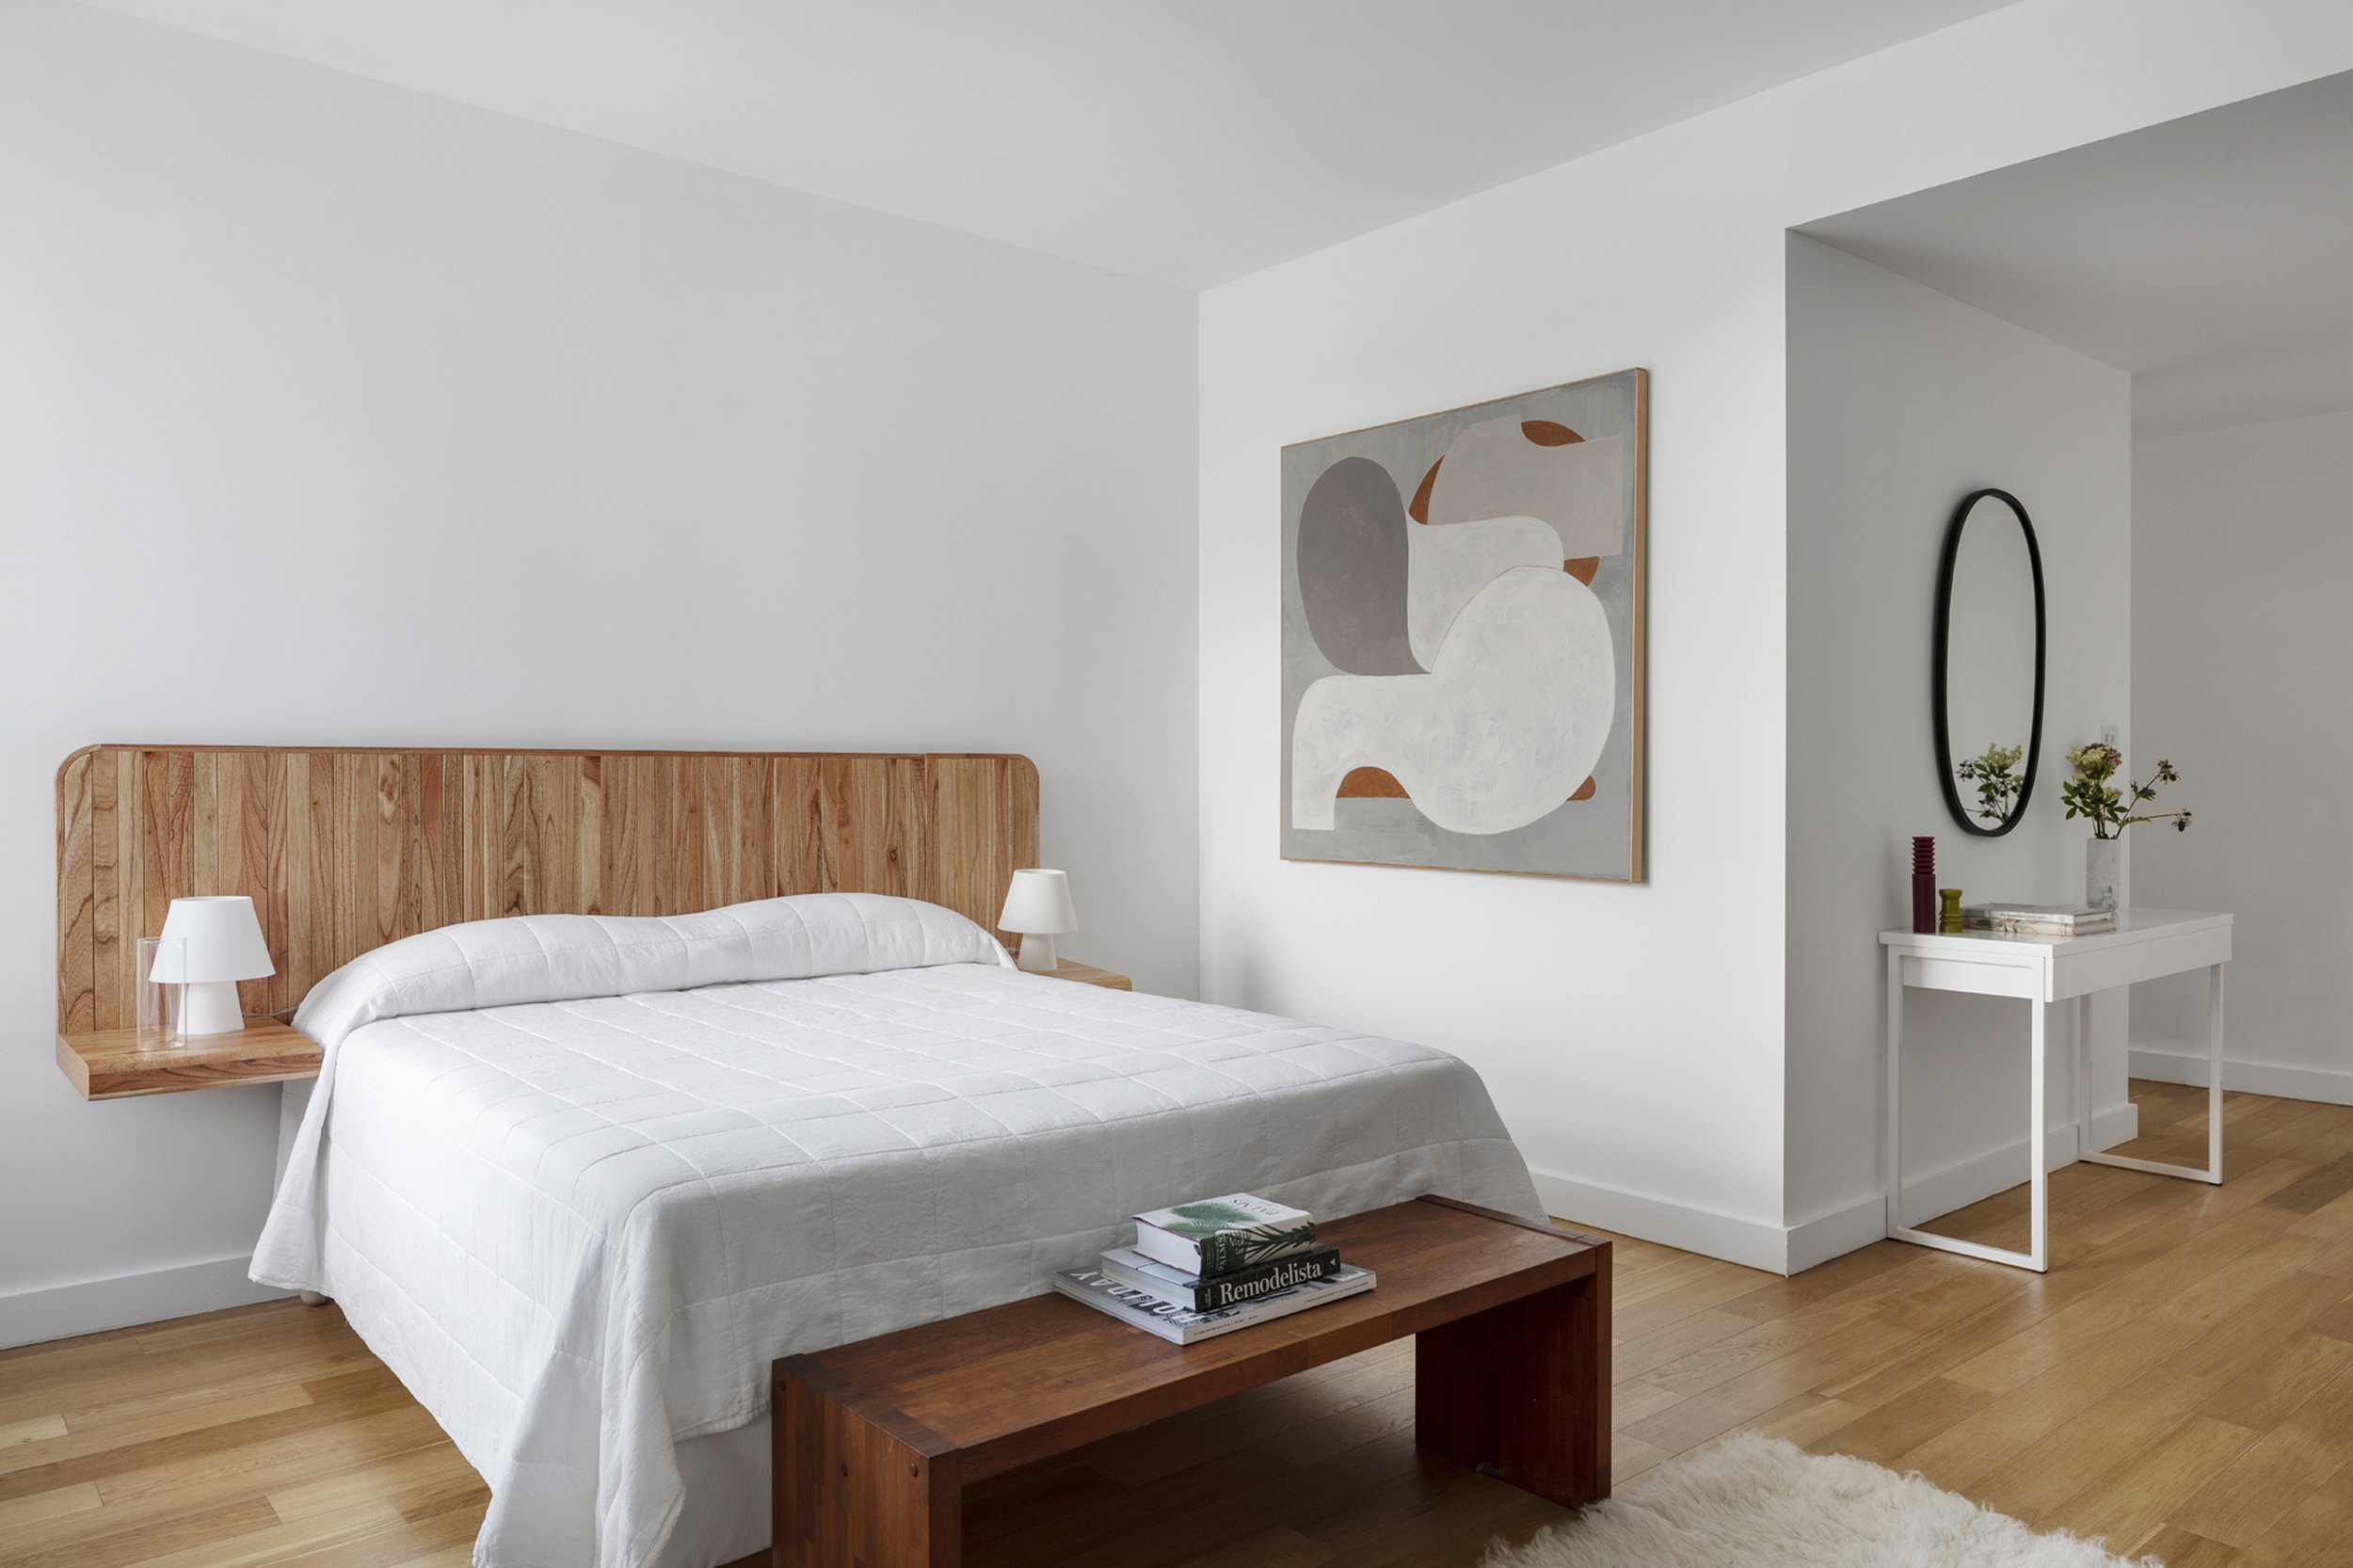  Hovey Design  North 7th PH1c   On Brooklyn’s water front. Hovey Design stages the large principal bedroom with a floating wooden headboard that offers nightstand surface. 